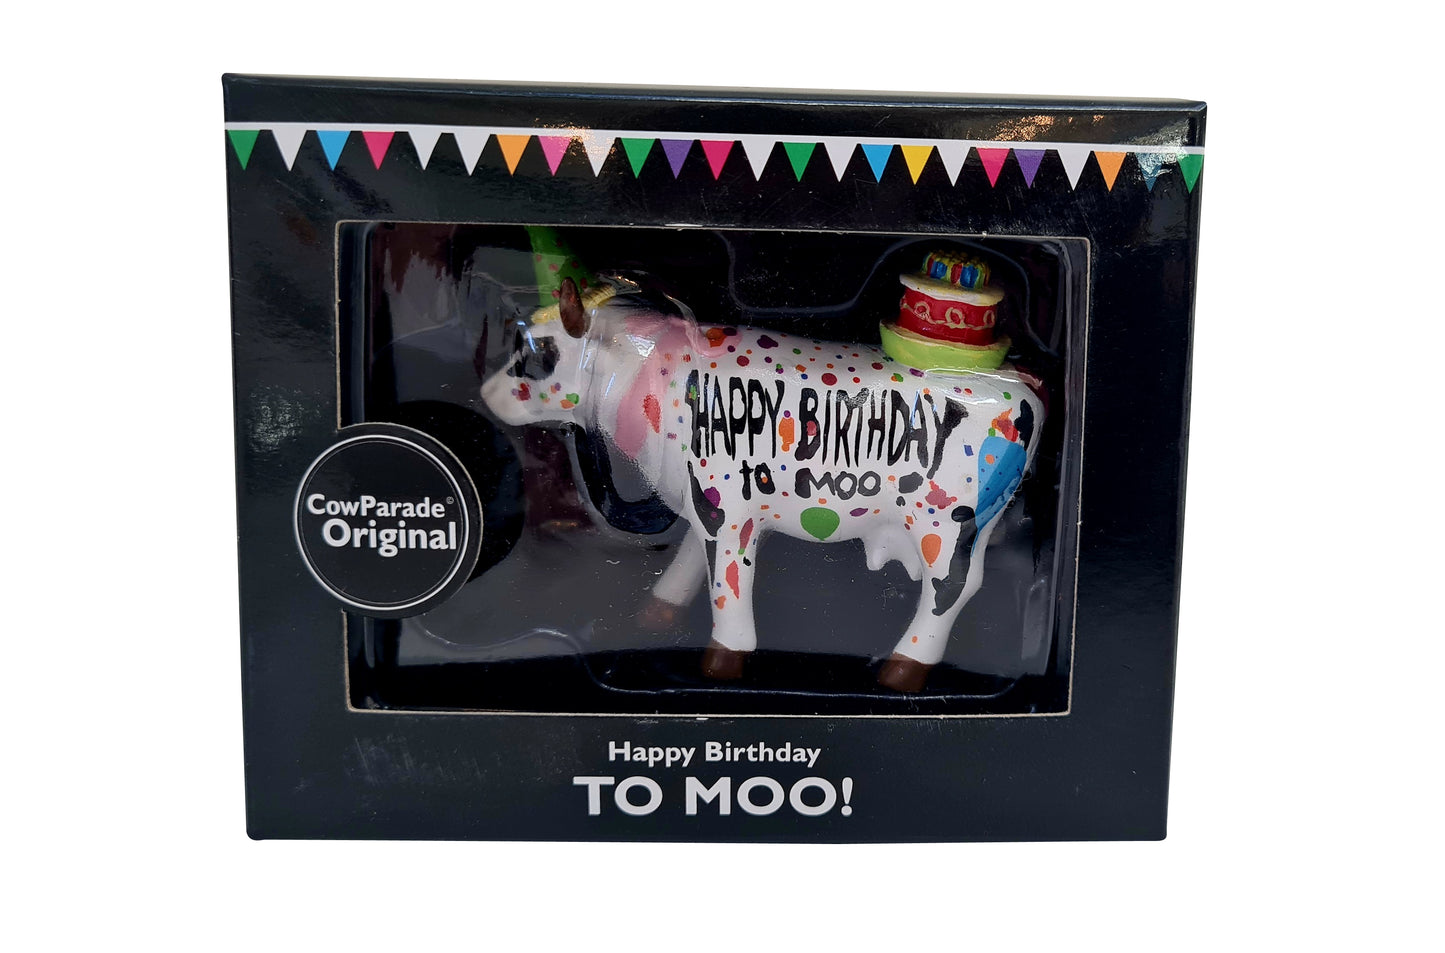 Small statue Cow Parade "Happy Birthday", ceramic. Length 2'5 inches (6.5 centimeters) 